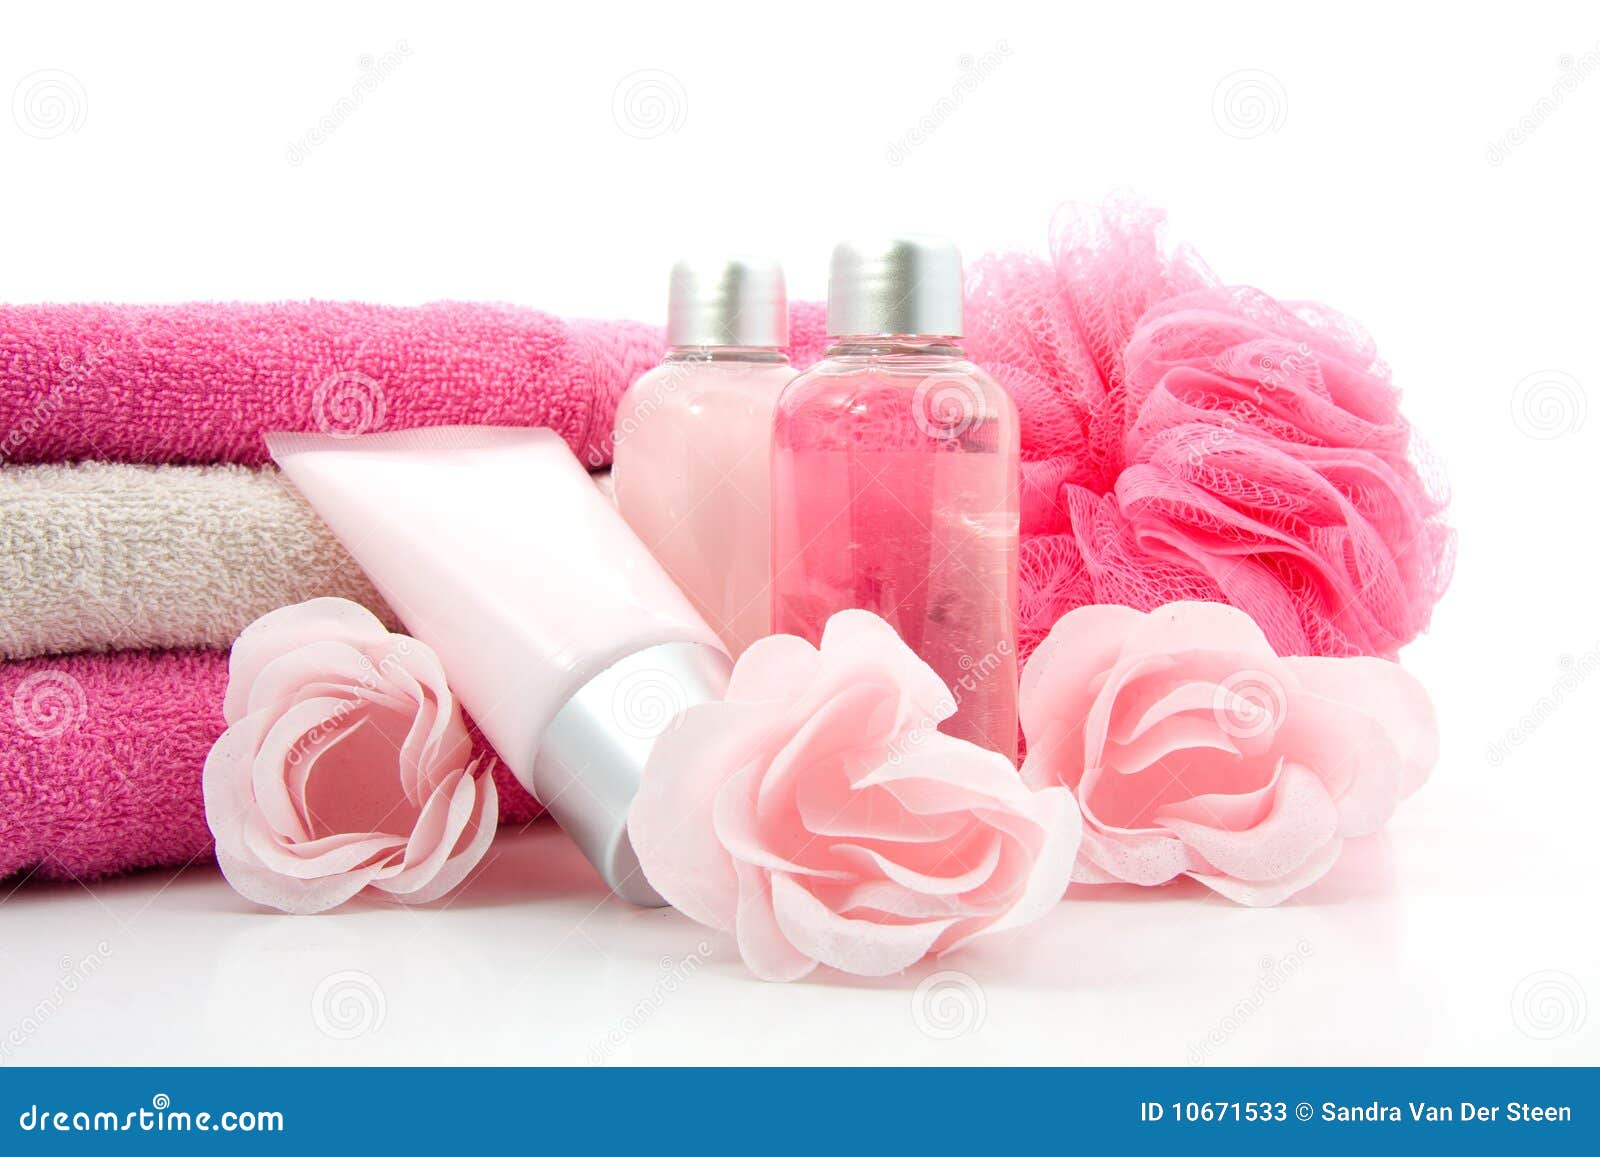 pink bathroom and spa accessory